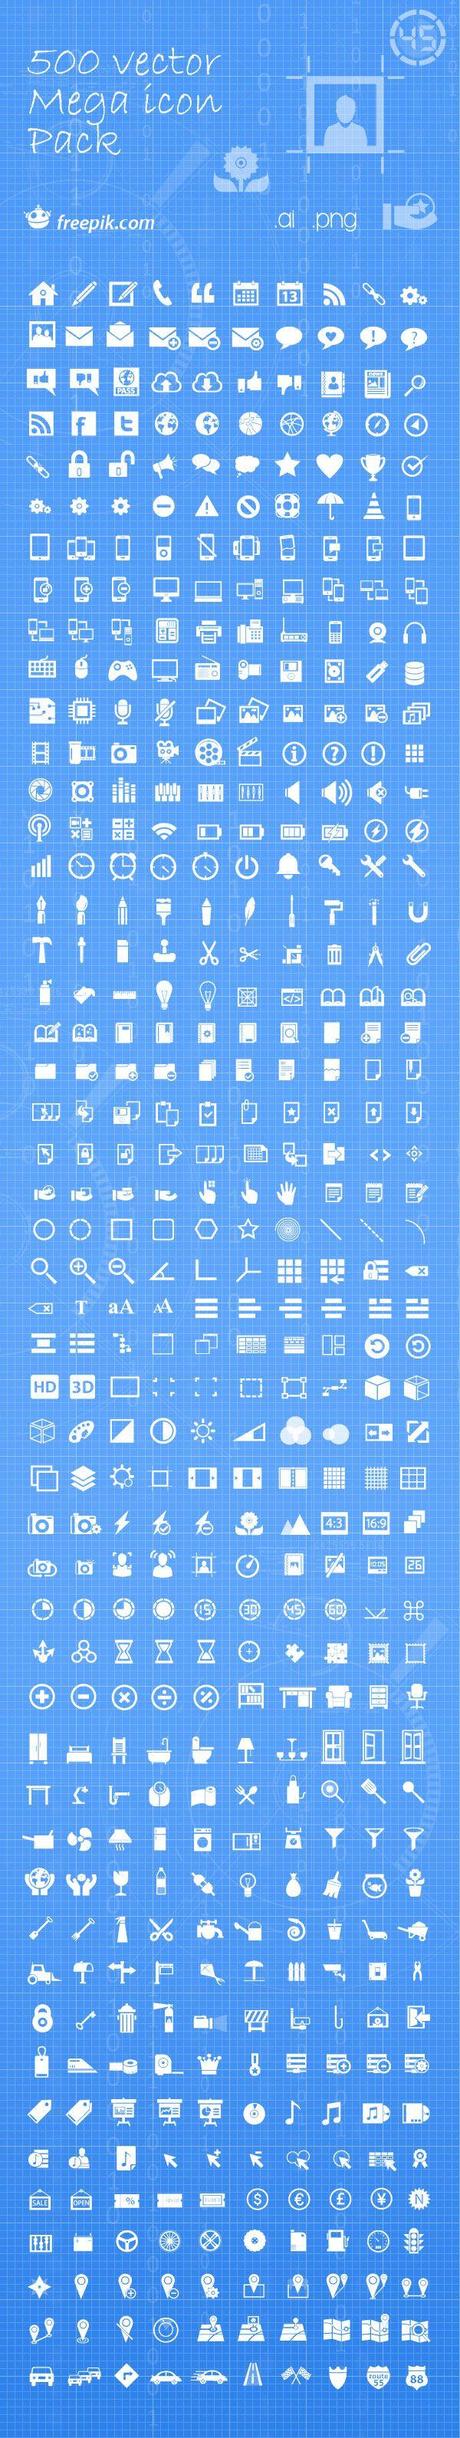 500 vector mega icon pack – free